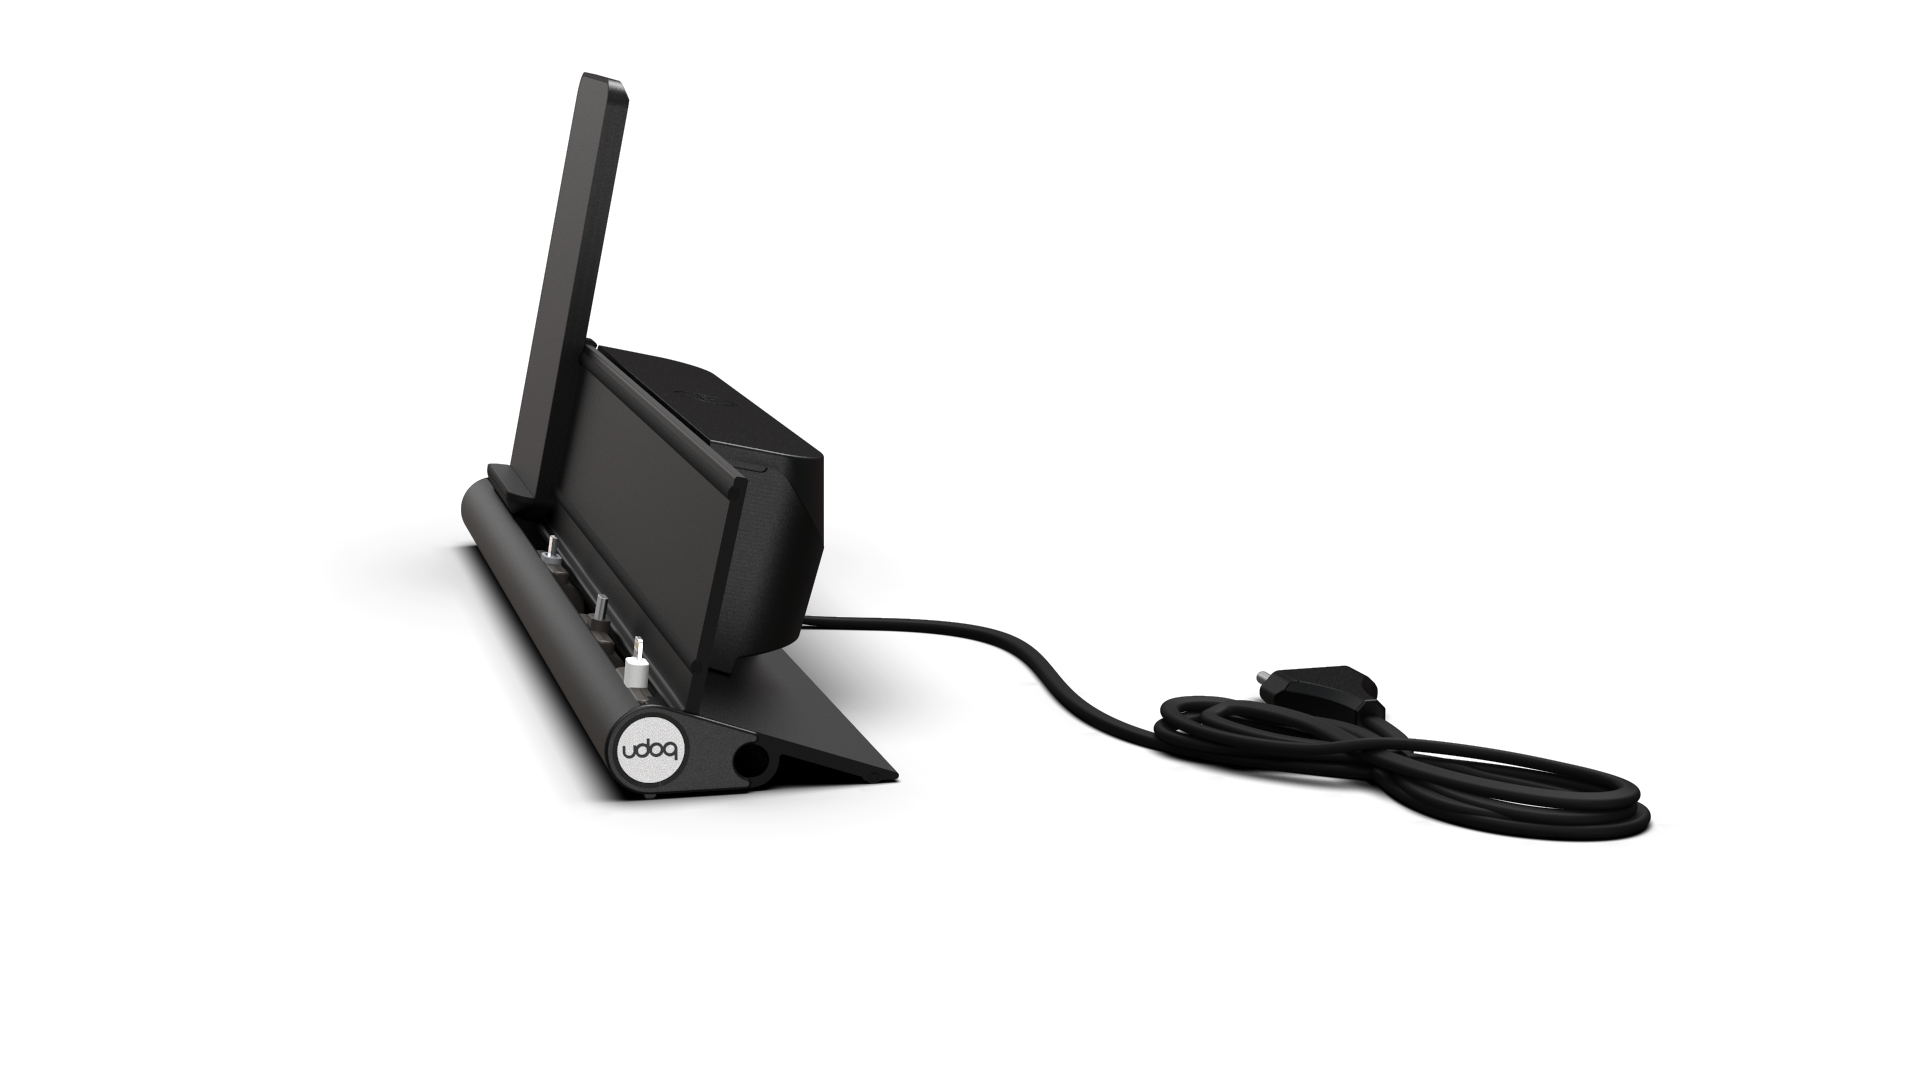 400 multi-charging station in black with wireless adapter and Lightning